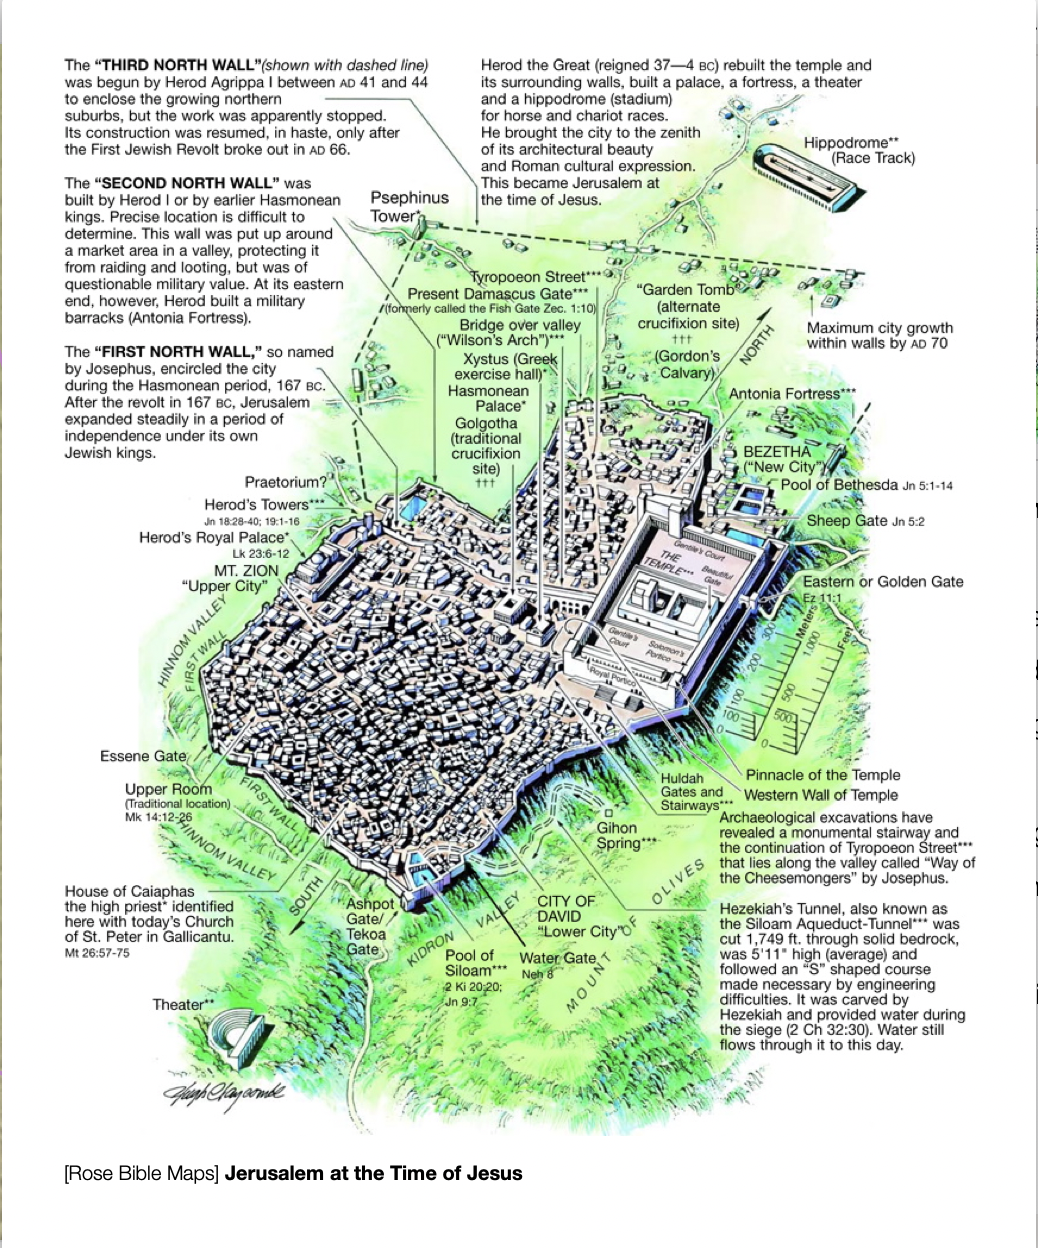 A 3D Map of Jerusalem at the time of Jesus with locations and descriptions of events in His ministry as recorded in the Bible.